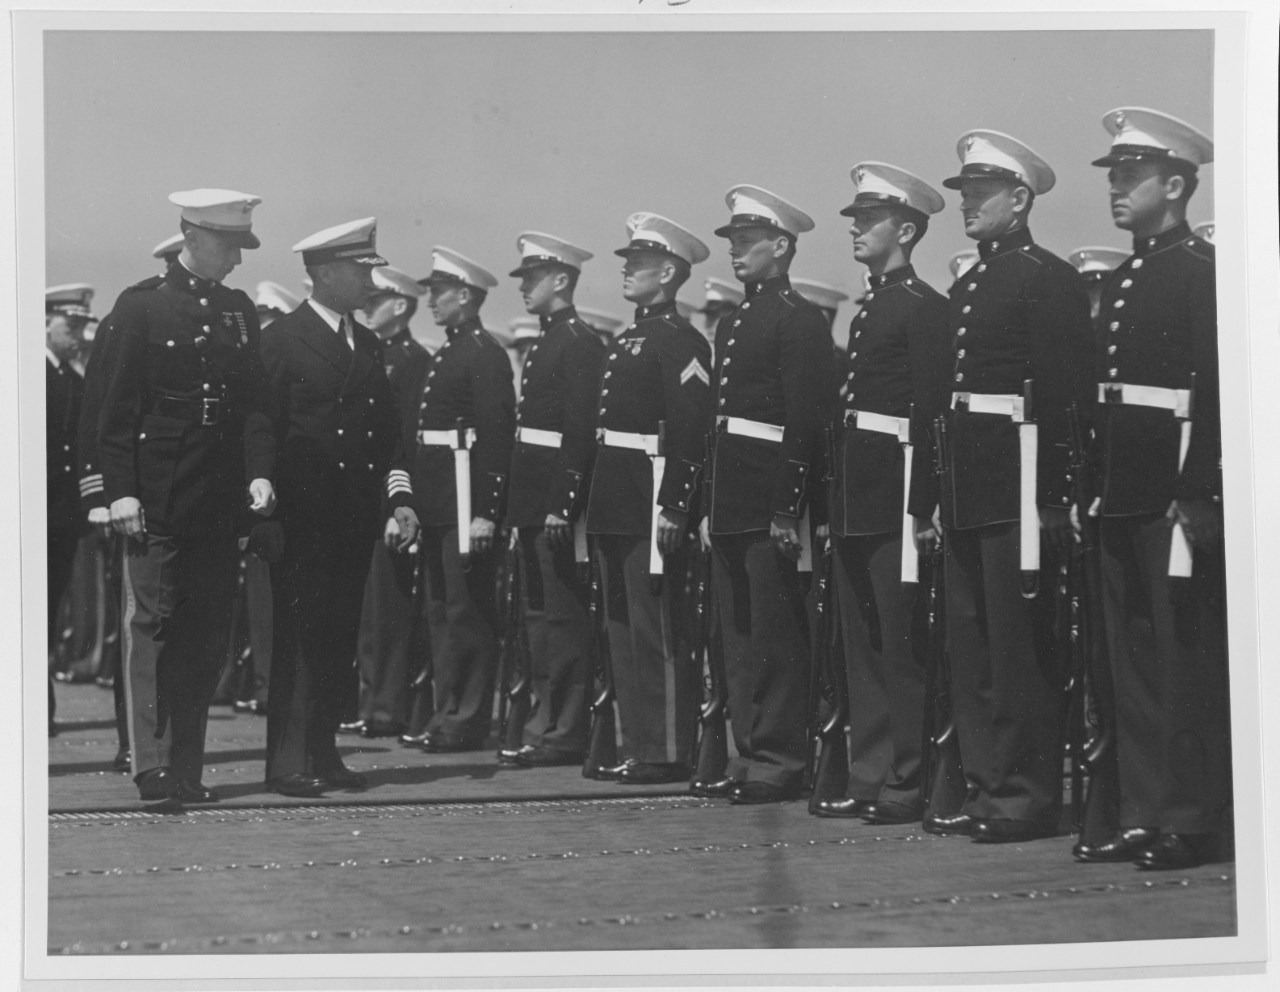 USS Wasp (CV-7) Captain Forrest P. Sherman, ship’s Commanding Officer, inspects her Marine detachment. Taken at San Diego, California, in June 1942. Official U.S. Navy Photograph 80-G-K-763, now in the collections of the National Archives